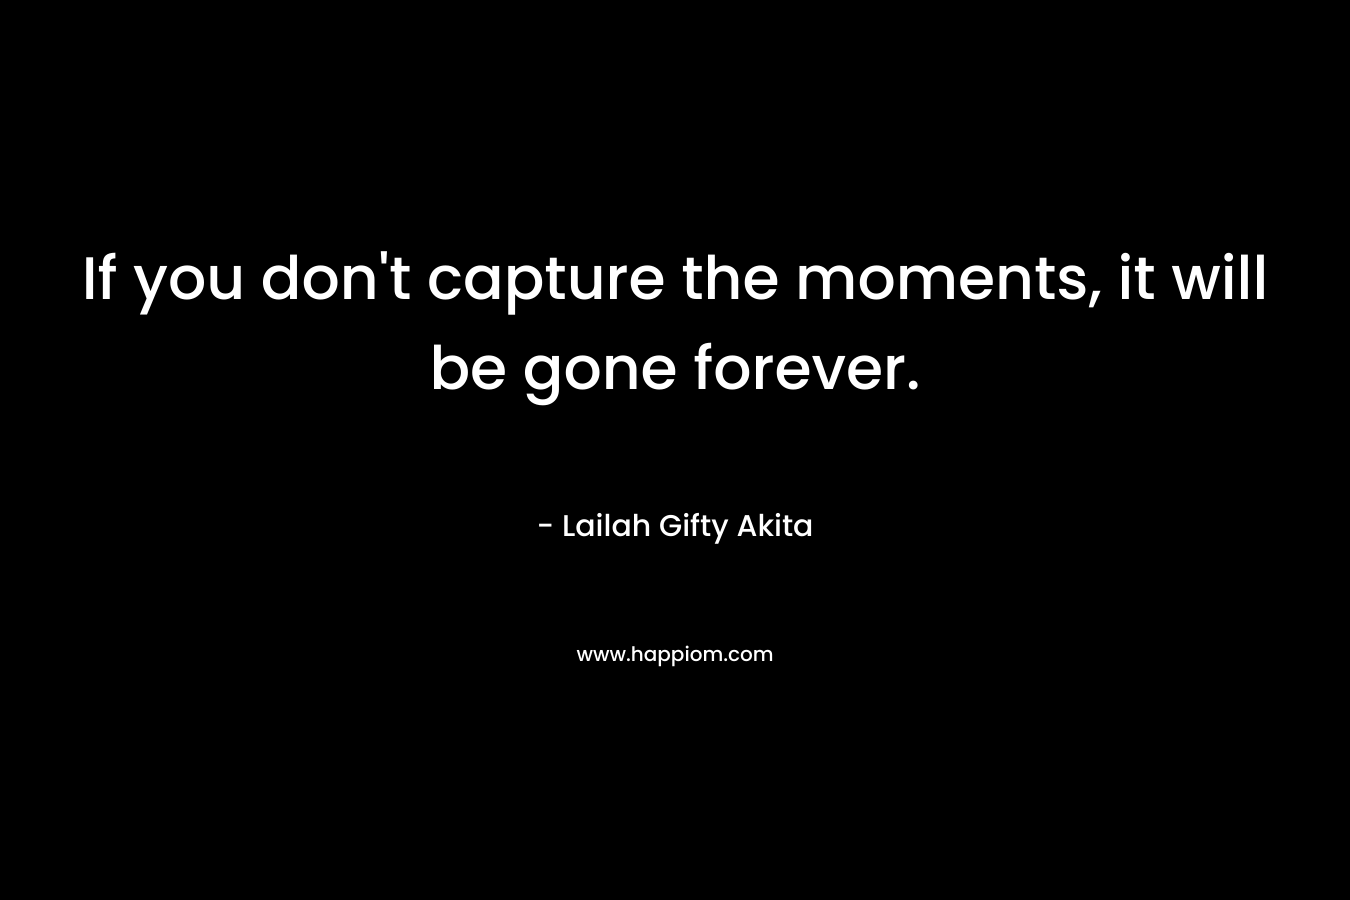 If you don't capture the moments, it will be gone forever.